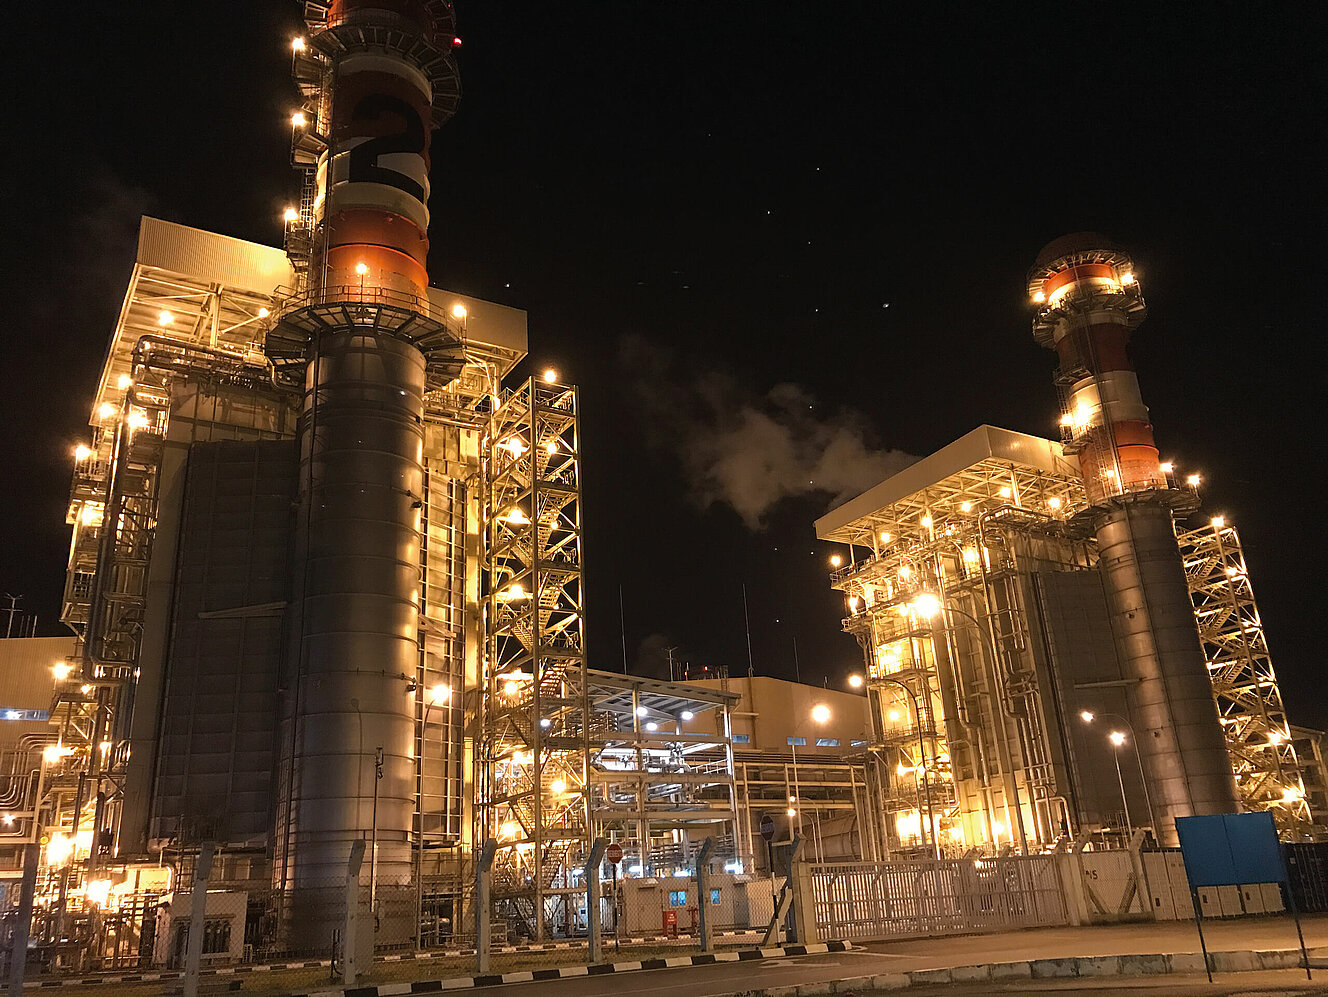 Combined Cycle Power Plant (CCPP) in Pray, Malaysia (at night)